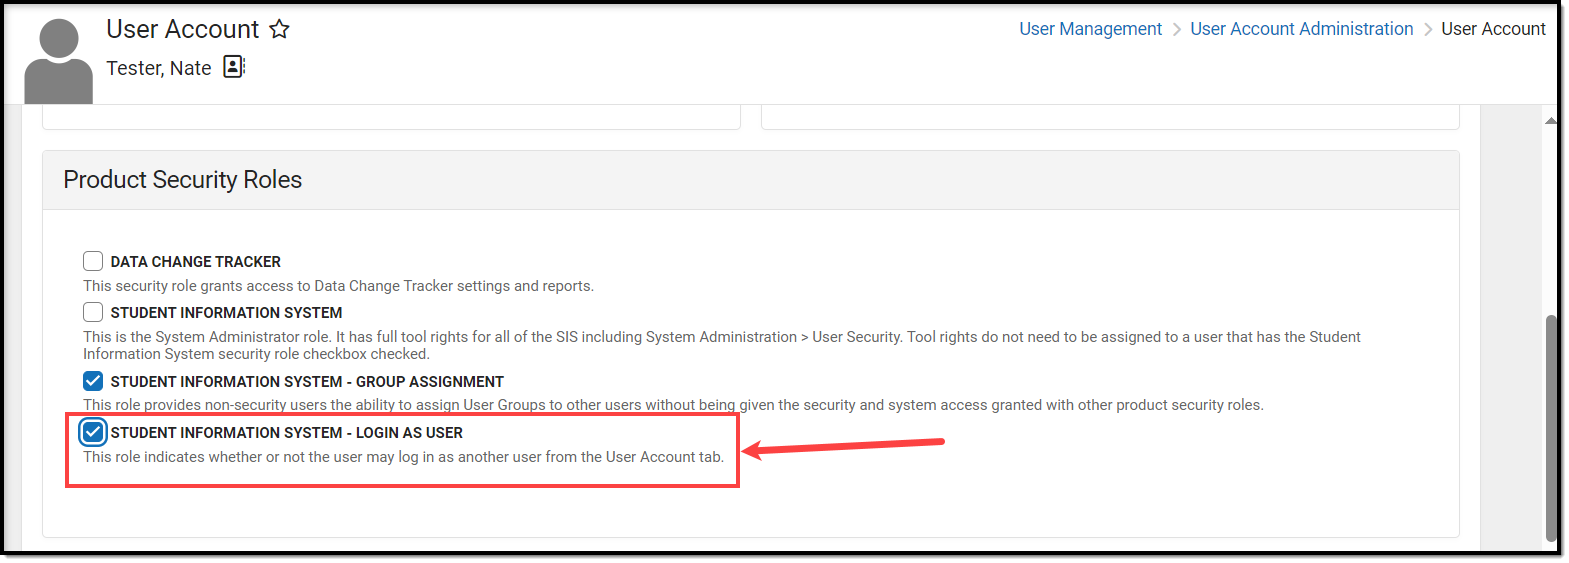 screenshot of the login as user product security role